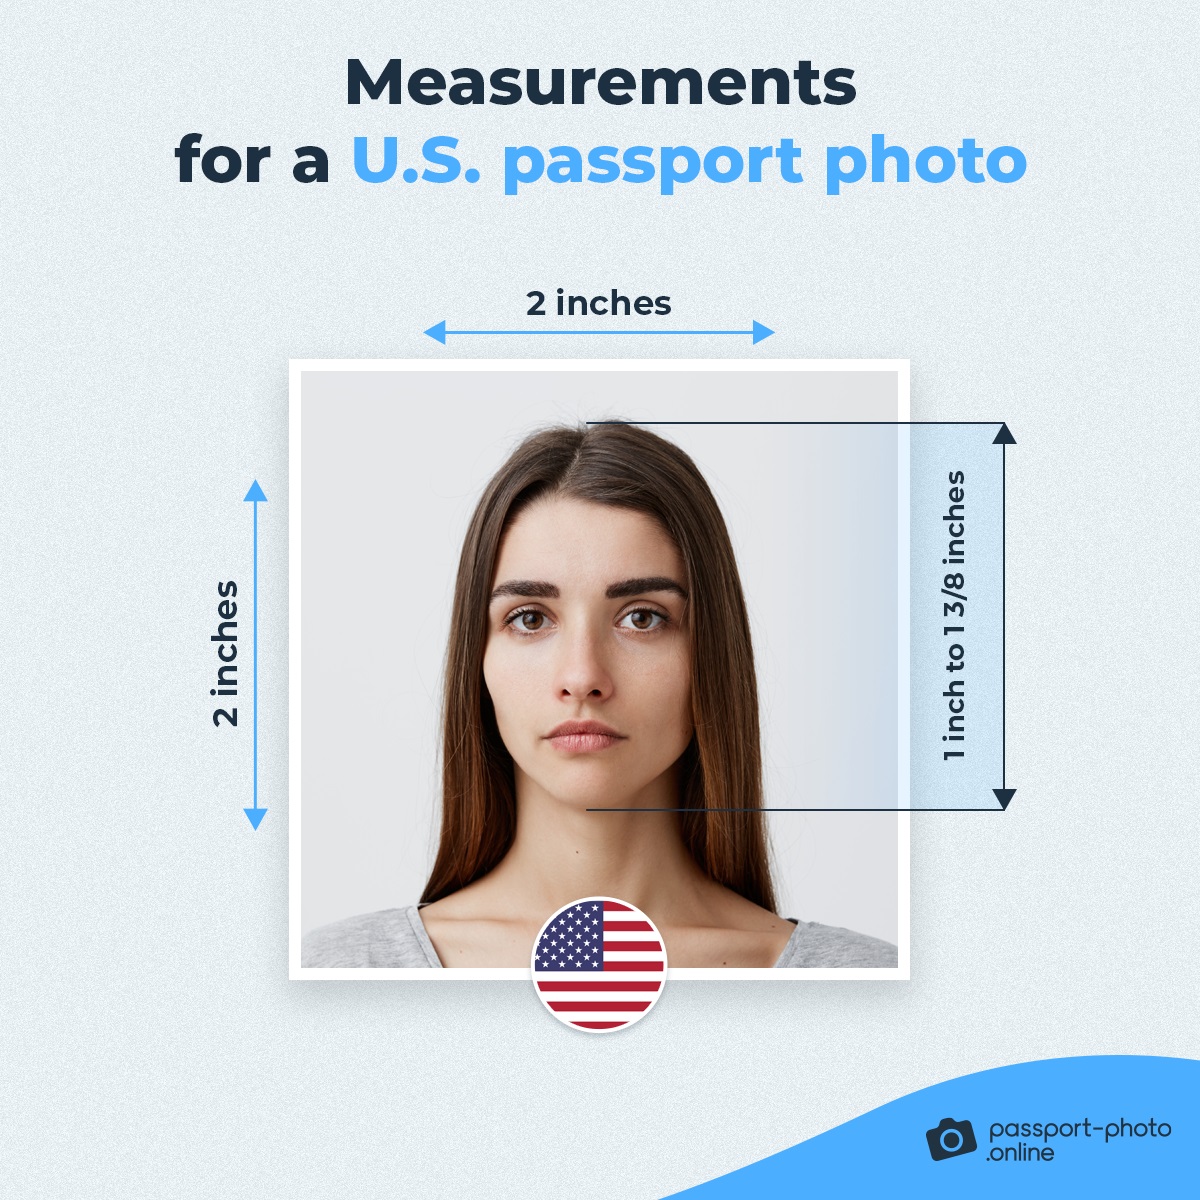 Measurements for a U.S. passport-style photo.